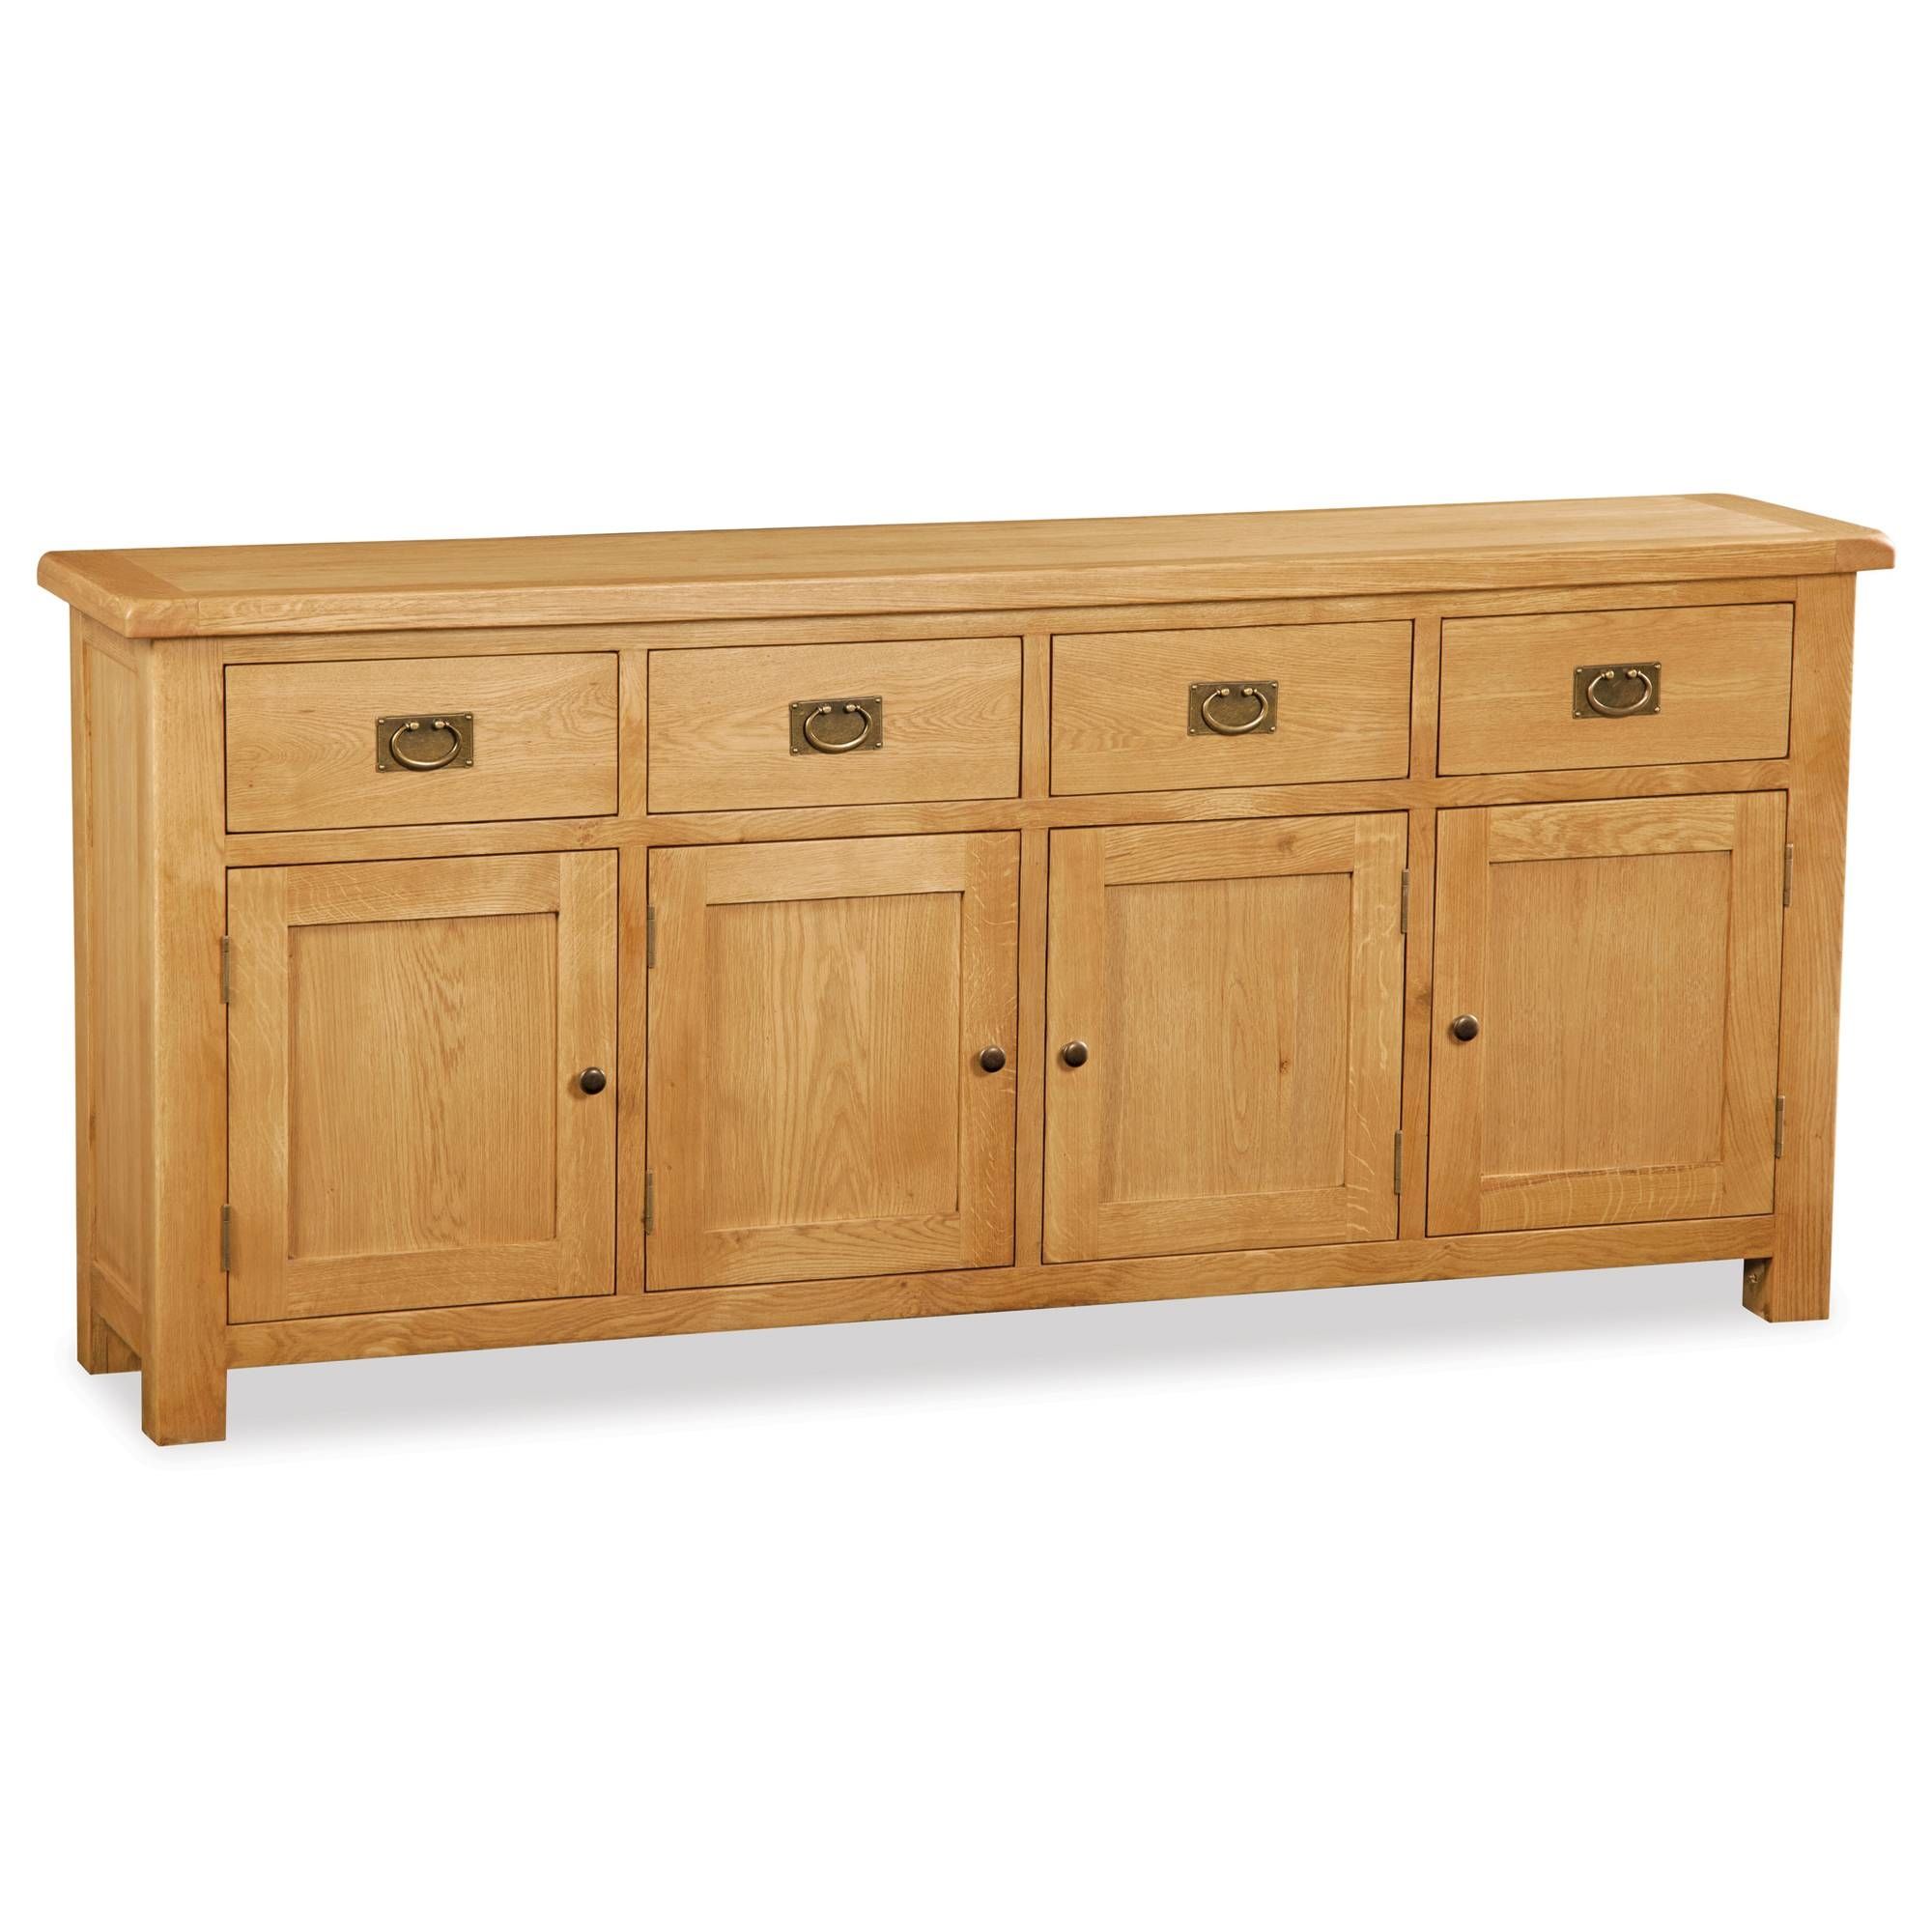 Cardington Extra Large Solid Oak Sideboard With 2017 Large Oak Sideboard (View 2 of 15)